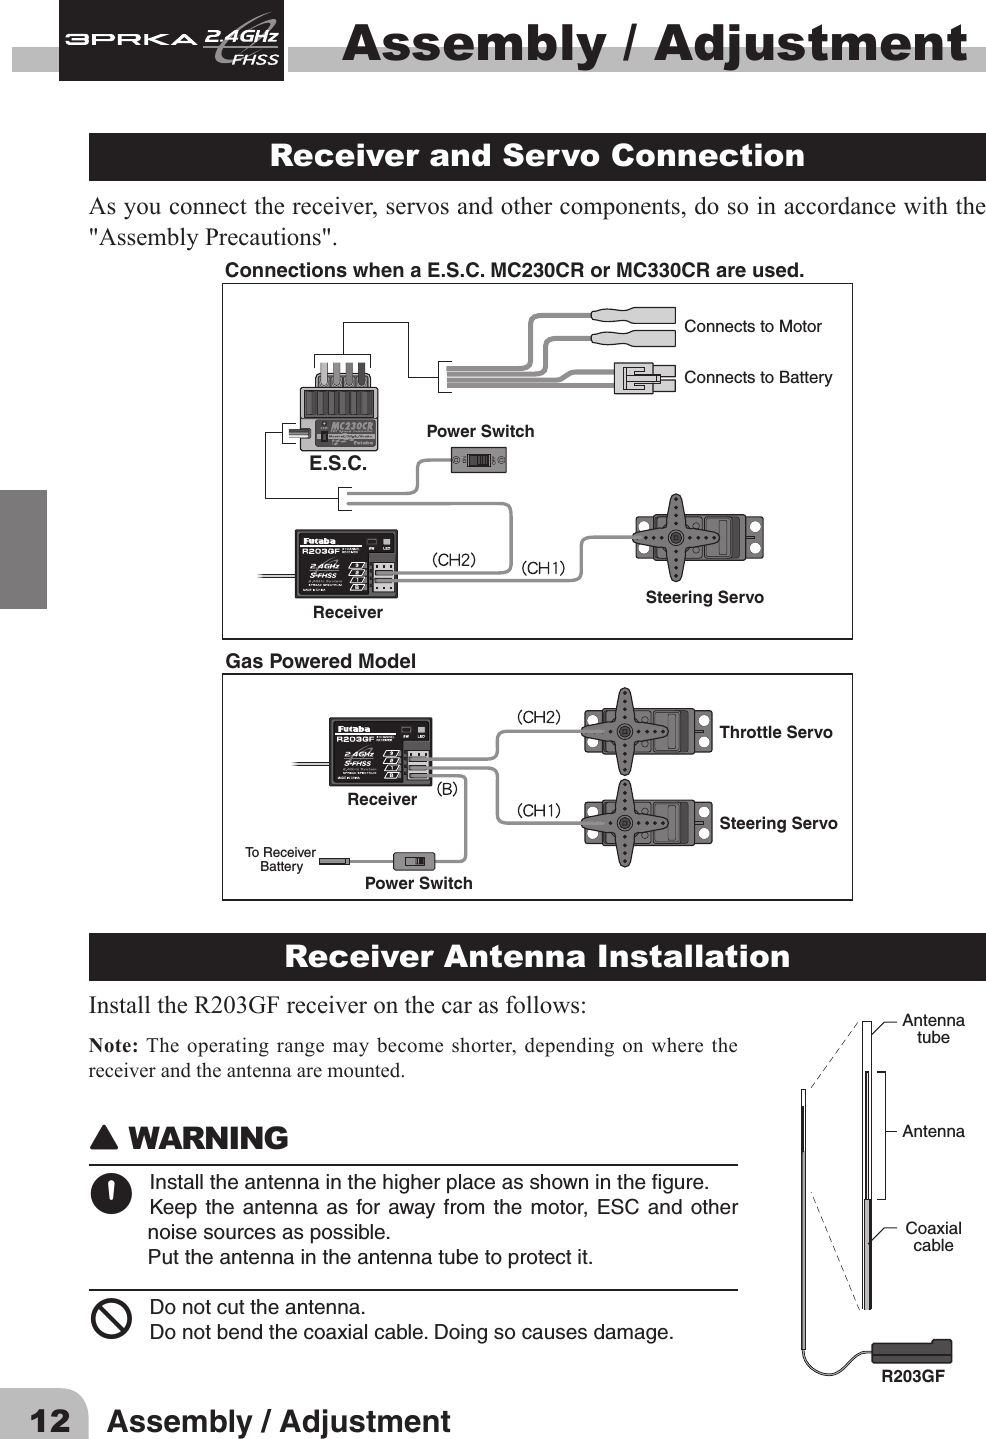 12 Assembly / AdjustmentAssembly / Adjustment Receiver and Servo Connection As you connect the receiver, servos and other components, do so in accordance with the &quot;Assembly Precautions&quot;. Connections when a E.S.C. MC230CR or MC330CR are used.Steering ServoThrottle ServoReceiverReceiverPower SwitchTo Receiver    BatterySteering ServoE.S.C.Power SwitchConnects to MotorConnects to BatteryGas Powered ModelReceiver Antenna InstallationInstalltheR203GFreceiveronthecarasfollows:Note: The operating range may become shorter, depending on where the receiver and the antenna are mounted.󾙈WARNING 󾙊Installtheantennainthehigherplaceasshowninthegure.Keepthe antenna asforaway fromthe motor,ESC and othernoisesourcesaspossible.Puttheantennaintheantennatubetoprotectit.󾛻Donotcuttheantenna.Donotbendthecoaxialcable.Doingsocausesdamage.AntennatubeAntennaCoaxialcableR203GF